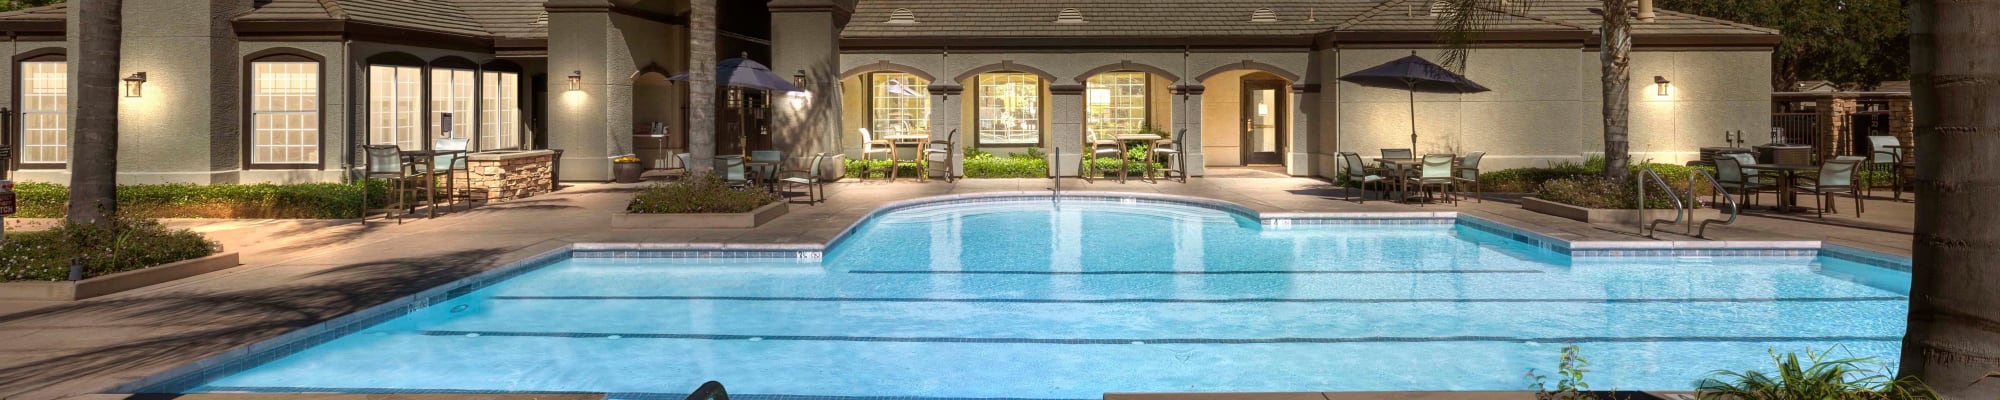 Amenities at River Oaks Apartment Homes in Vacaville, California